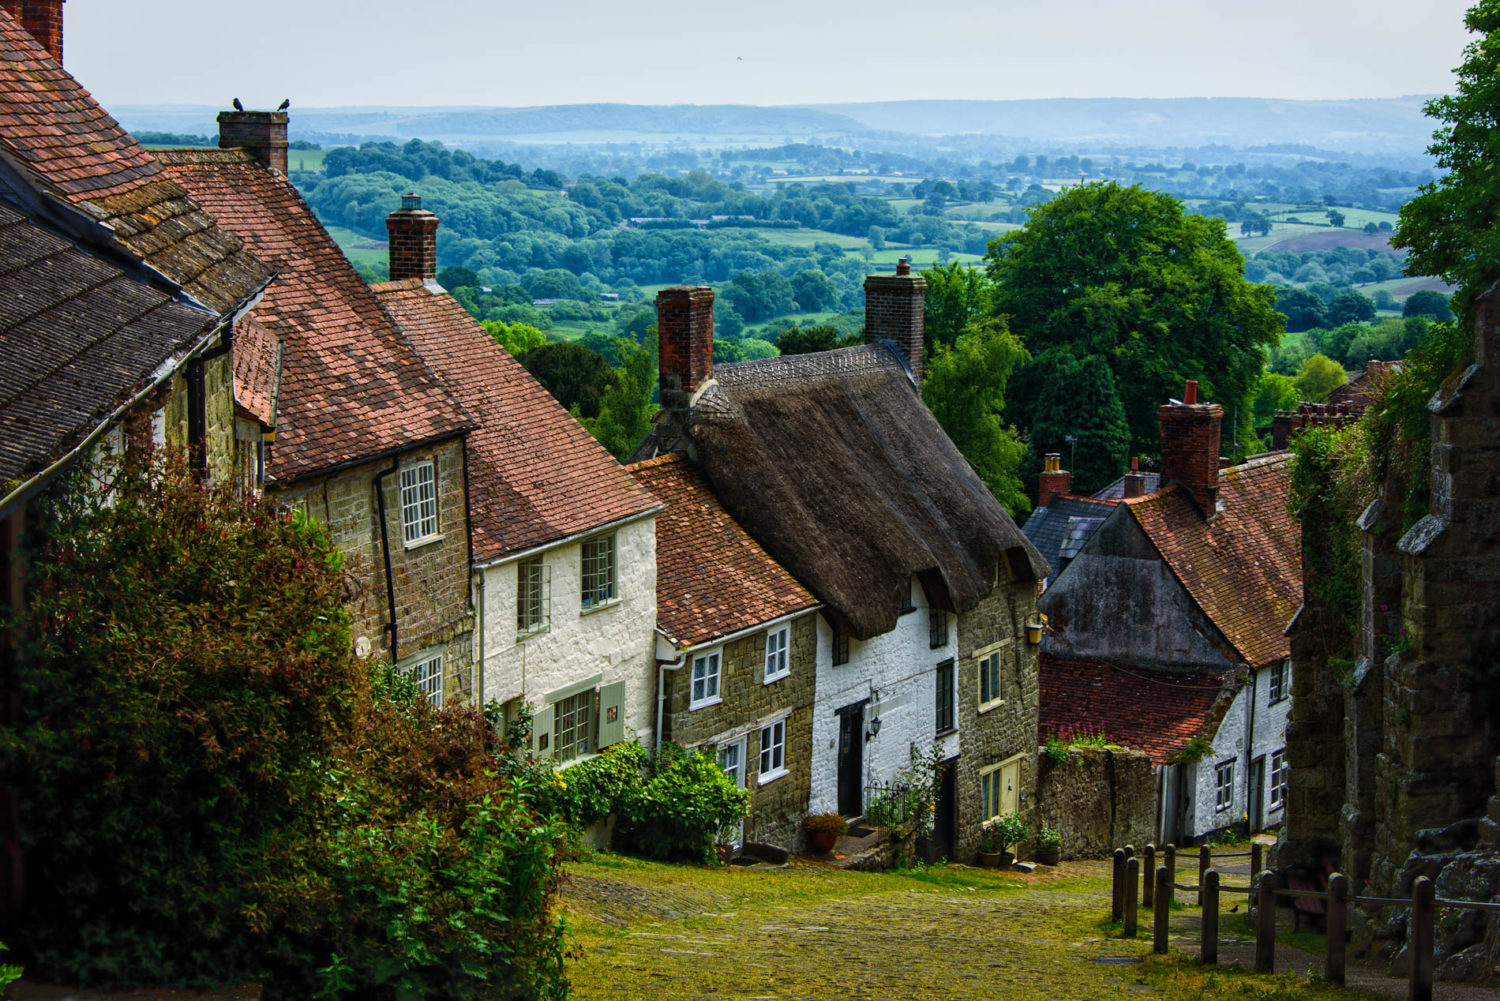 The beautiful village of Shaftesbury in Dorset, England.